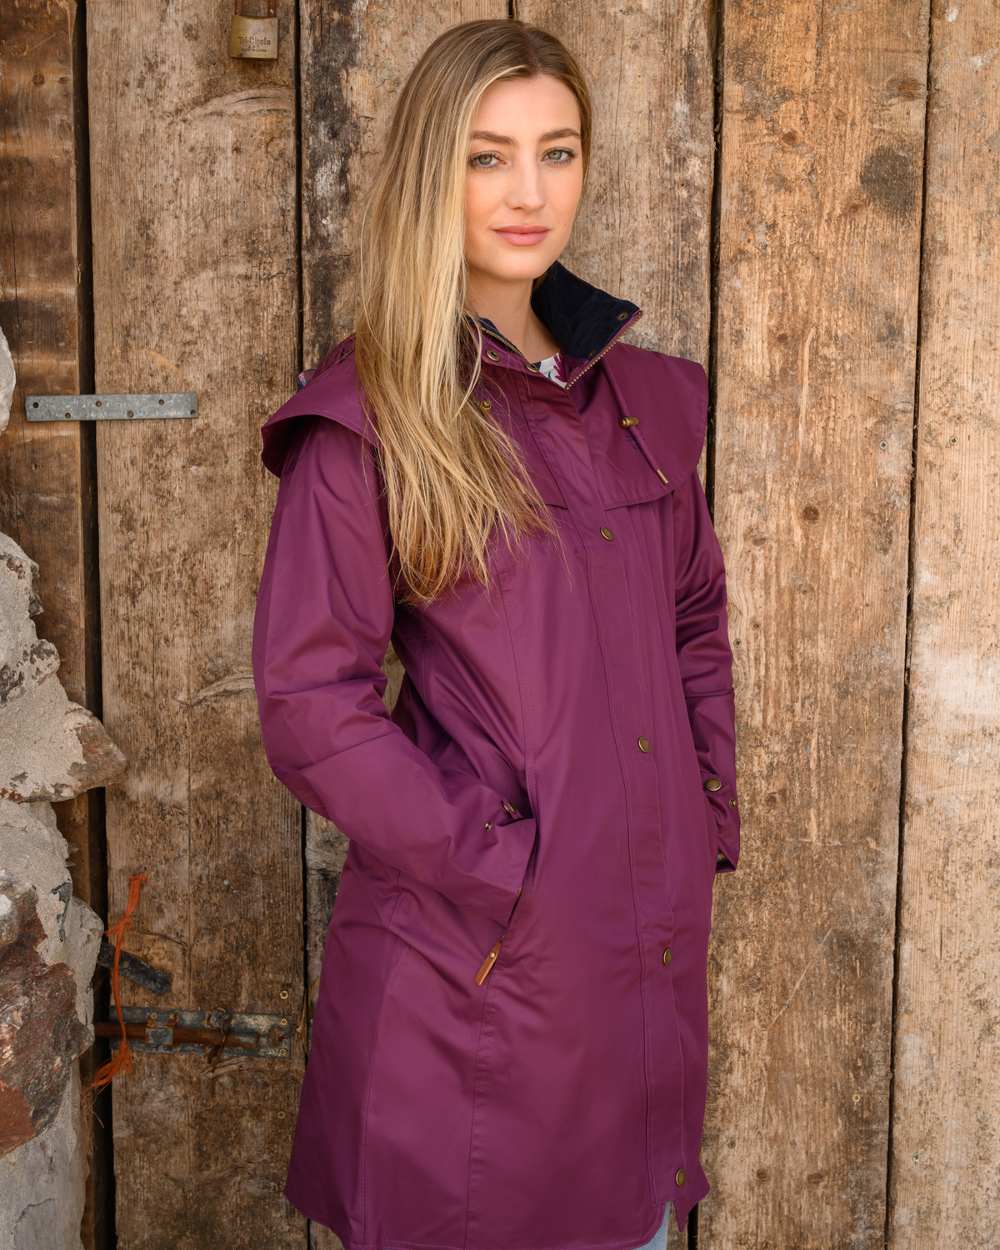 Plum coloured Lighthouse Outrider 3/4 Length Ladies Waterproof Raincoat on Wooded Door background 